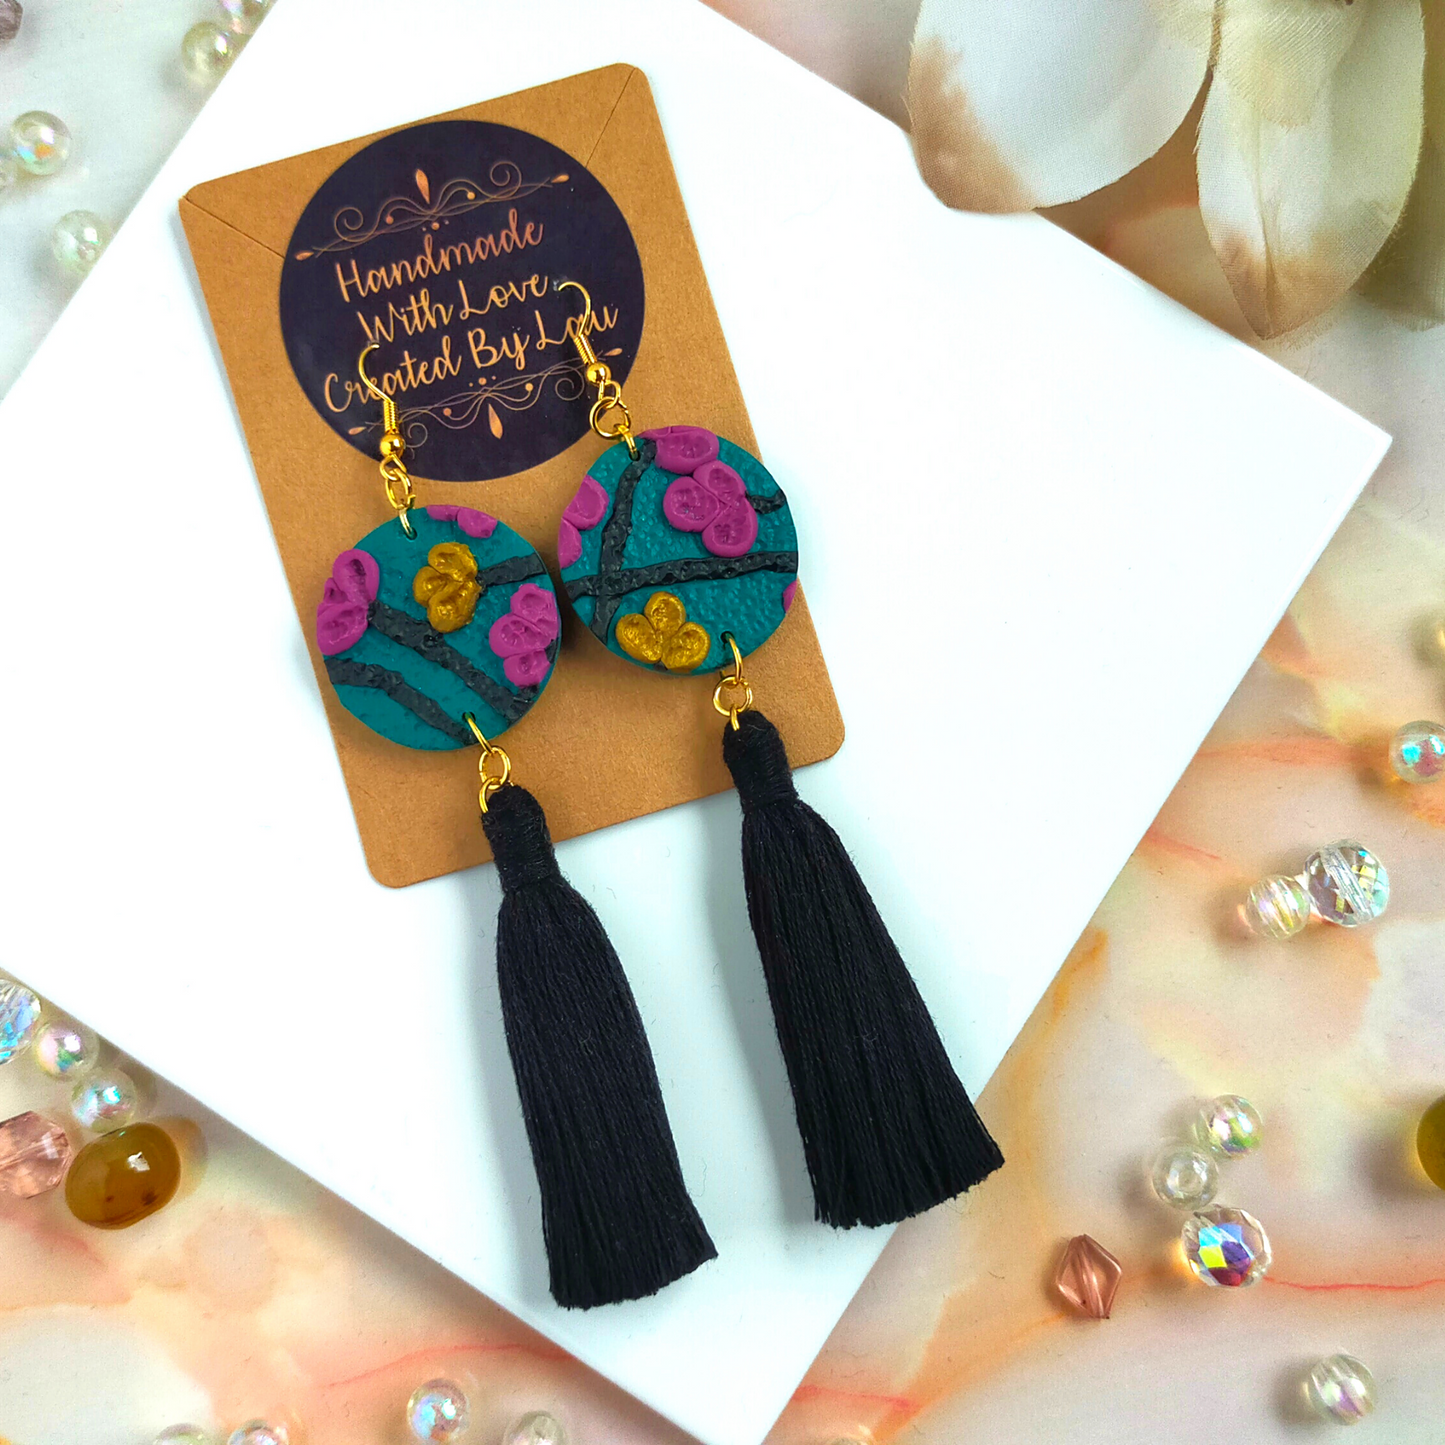 "Scarlett" Gold Plated Green Flora Polymer Clay Earrings with Tassel